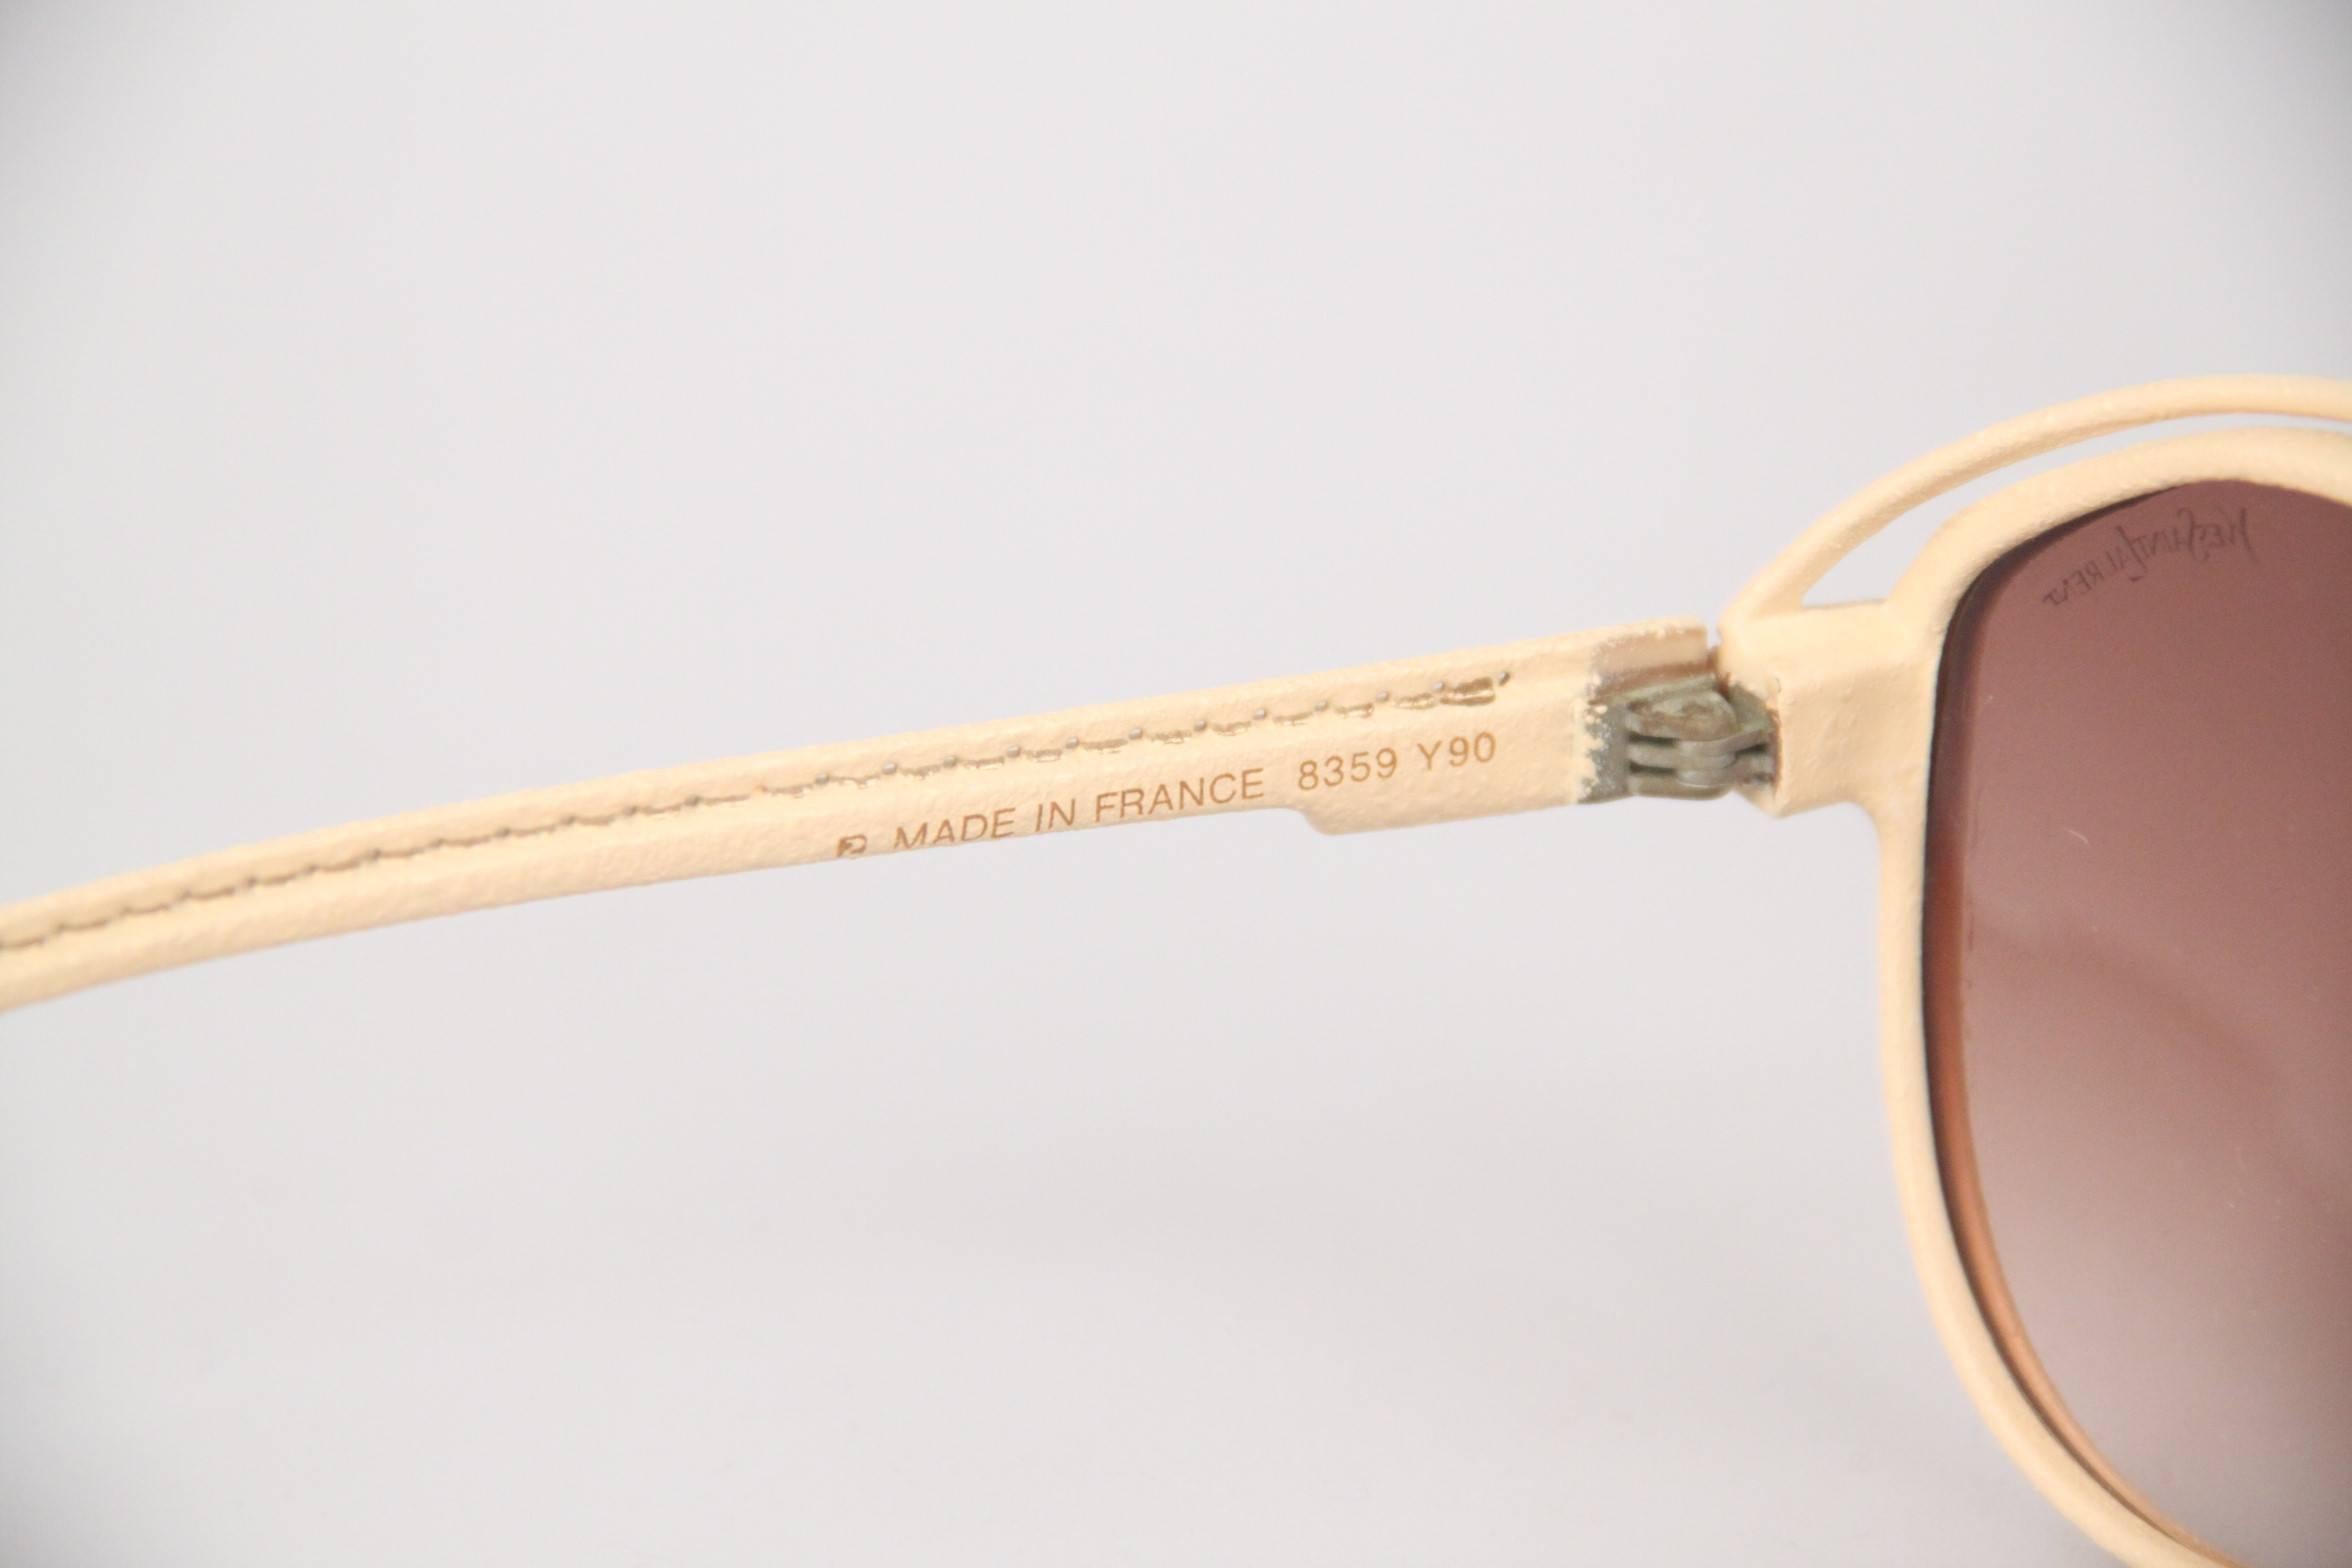 Yves Saint Laurent Vintage Mint Sunglasses Tan Leather Aviator 8359 Y90 In New Condition In Rome, Rome